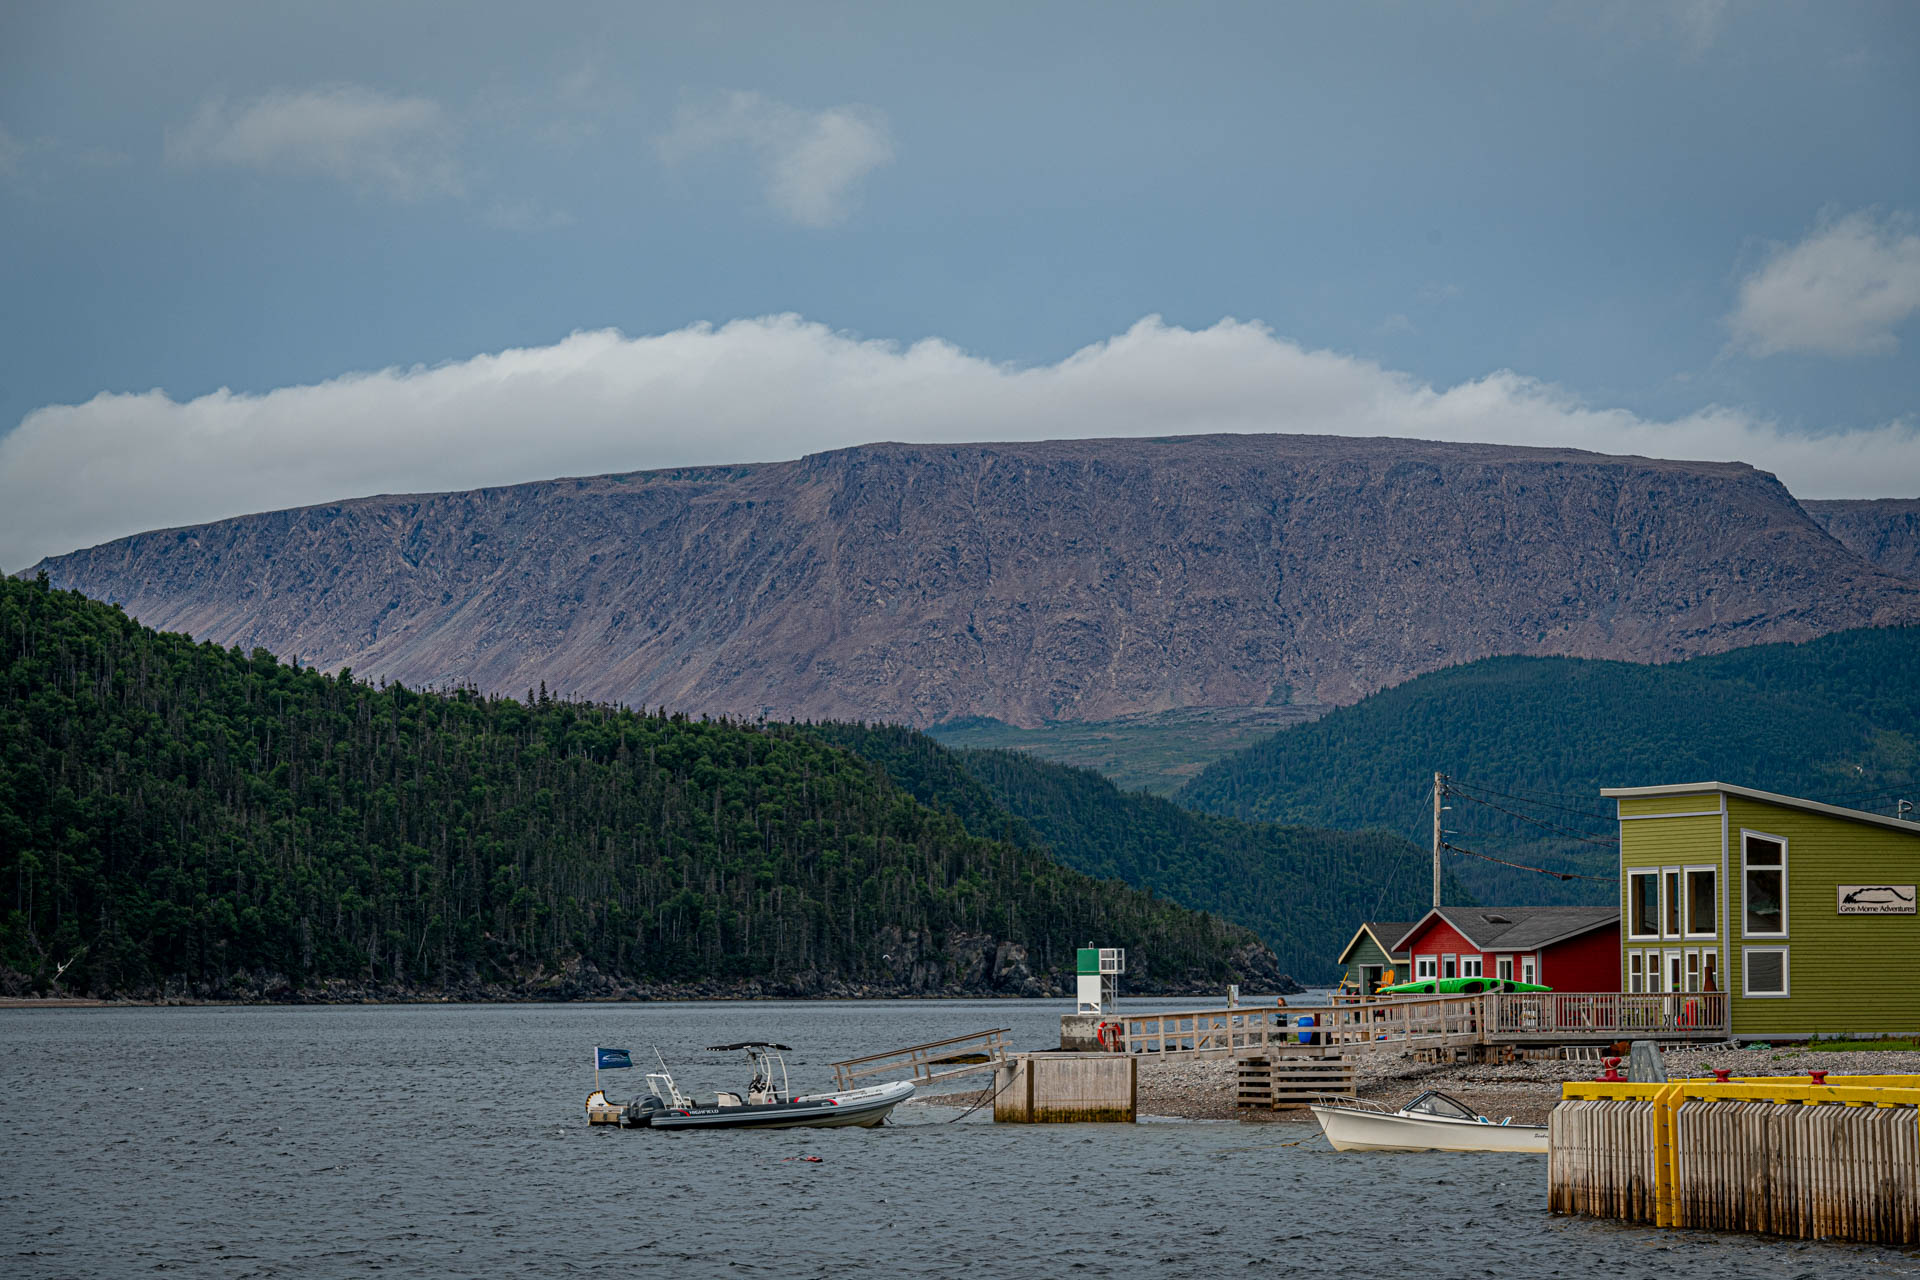 The Tablelands in Gros Morne viewed from Norris Point